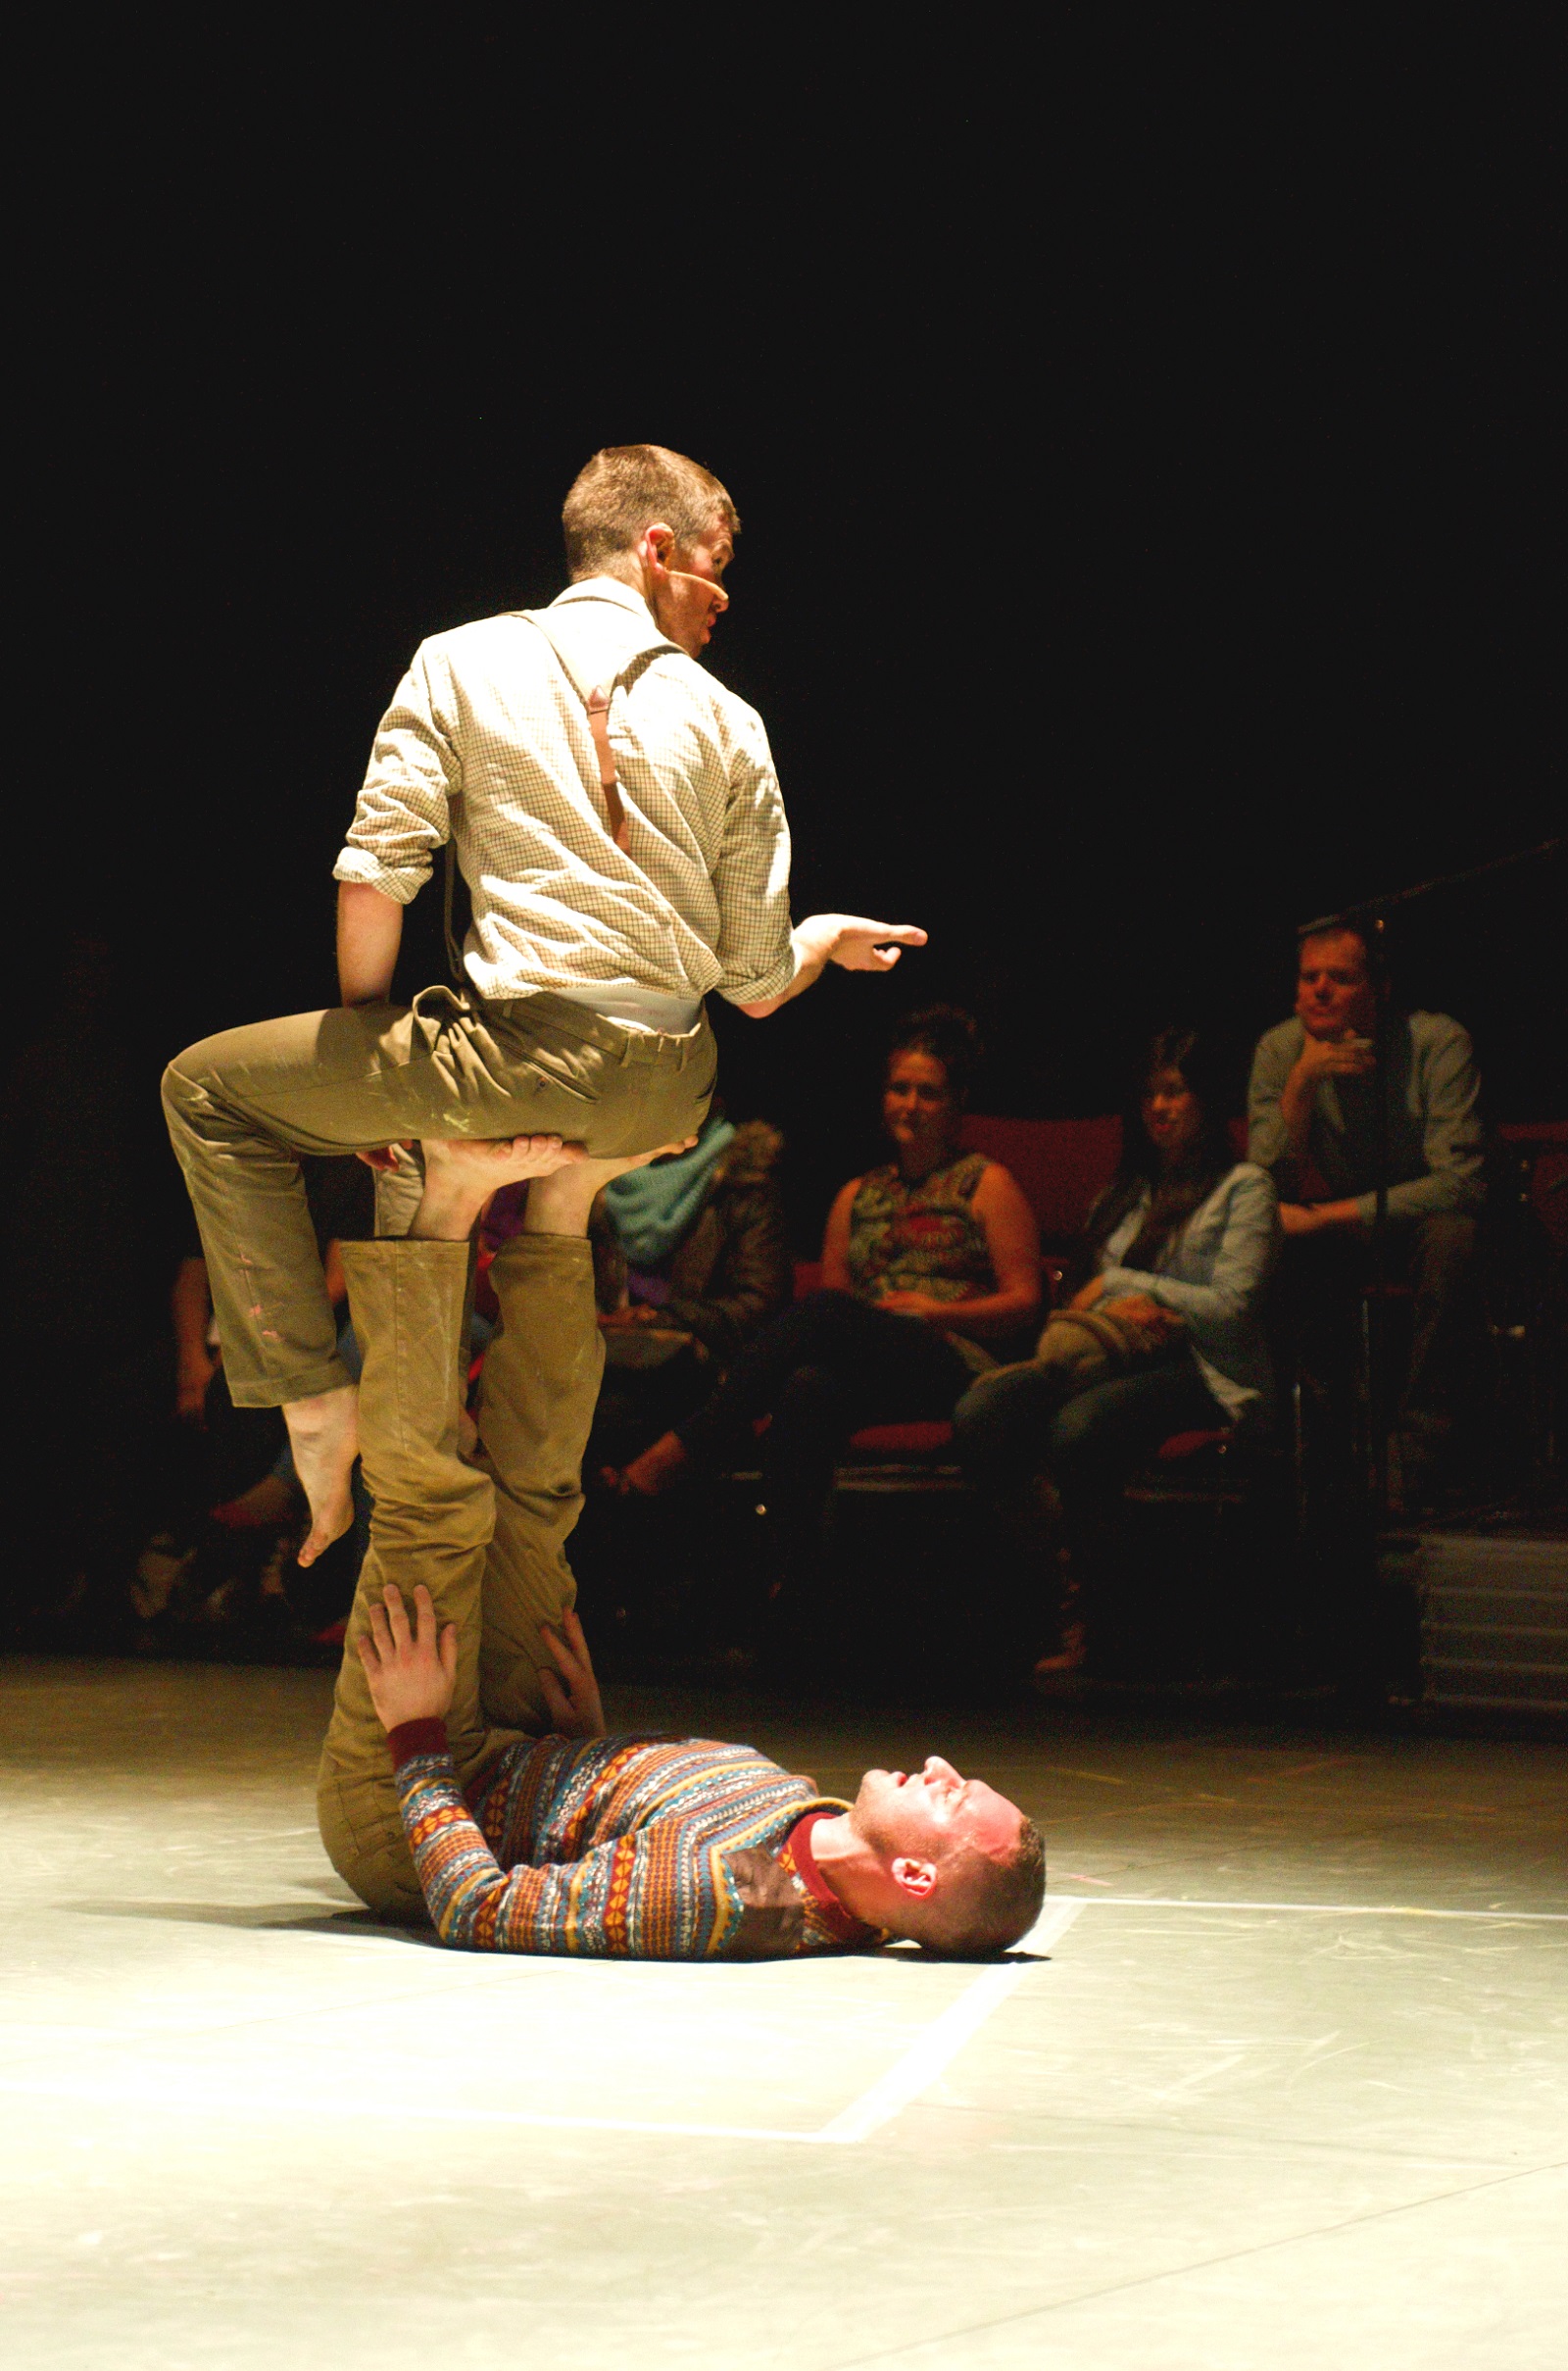 Stephen Moynihan and Stuart Waters in Border Tales